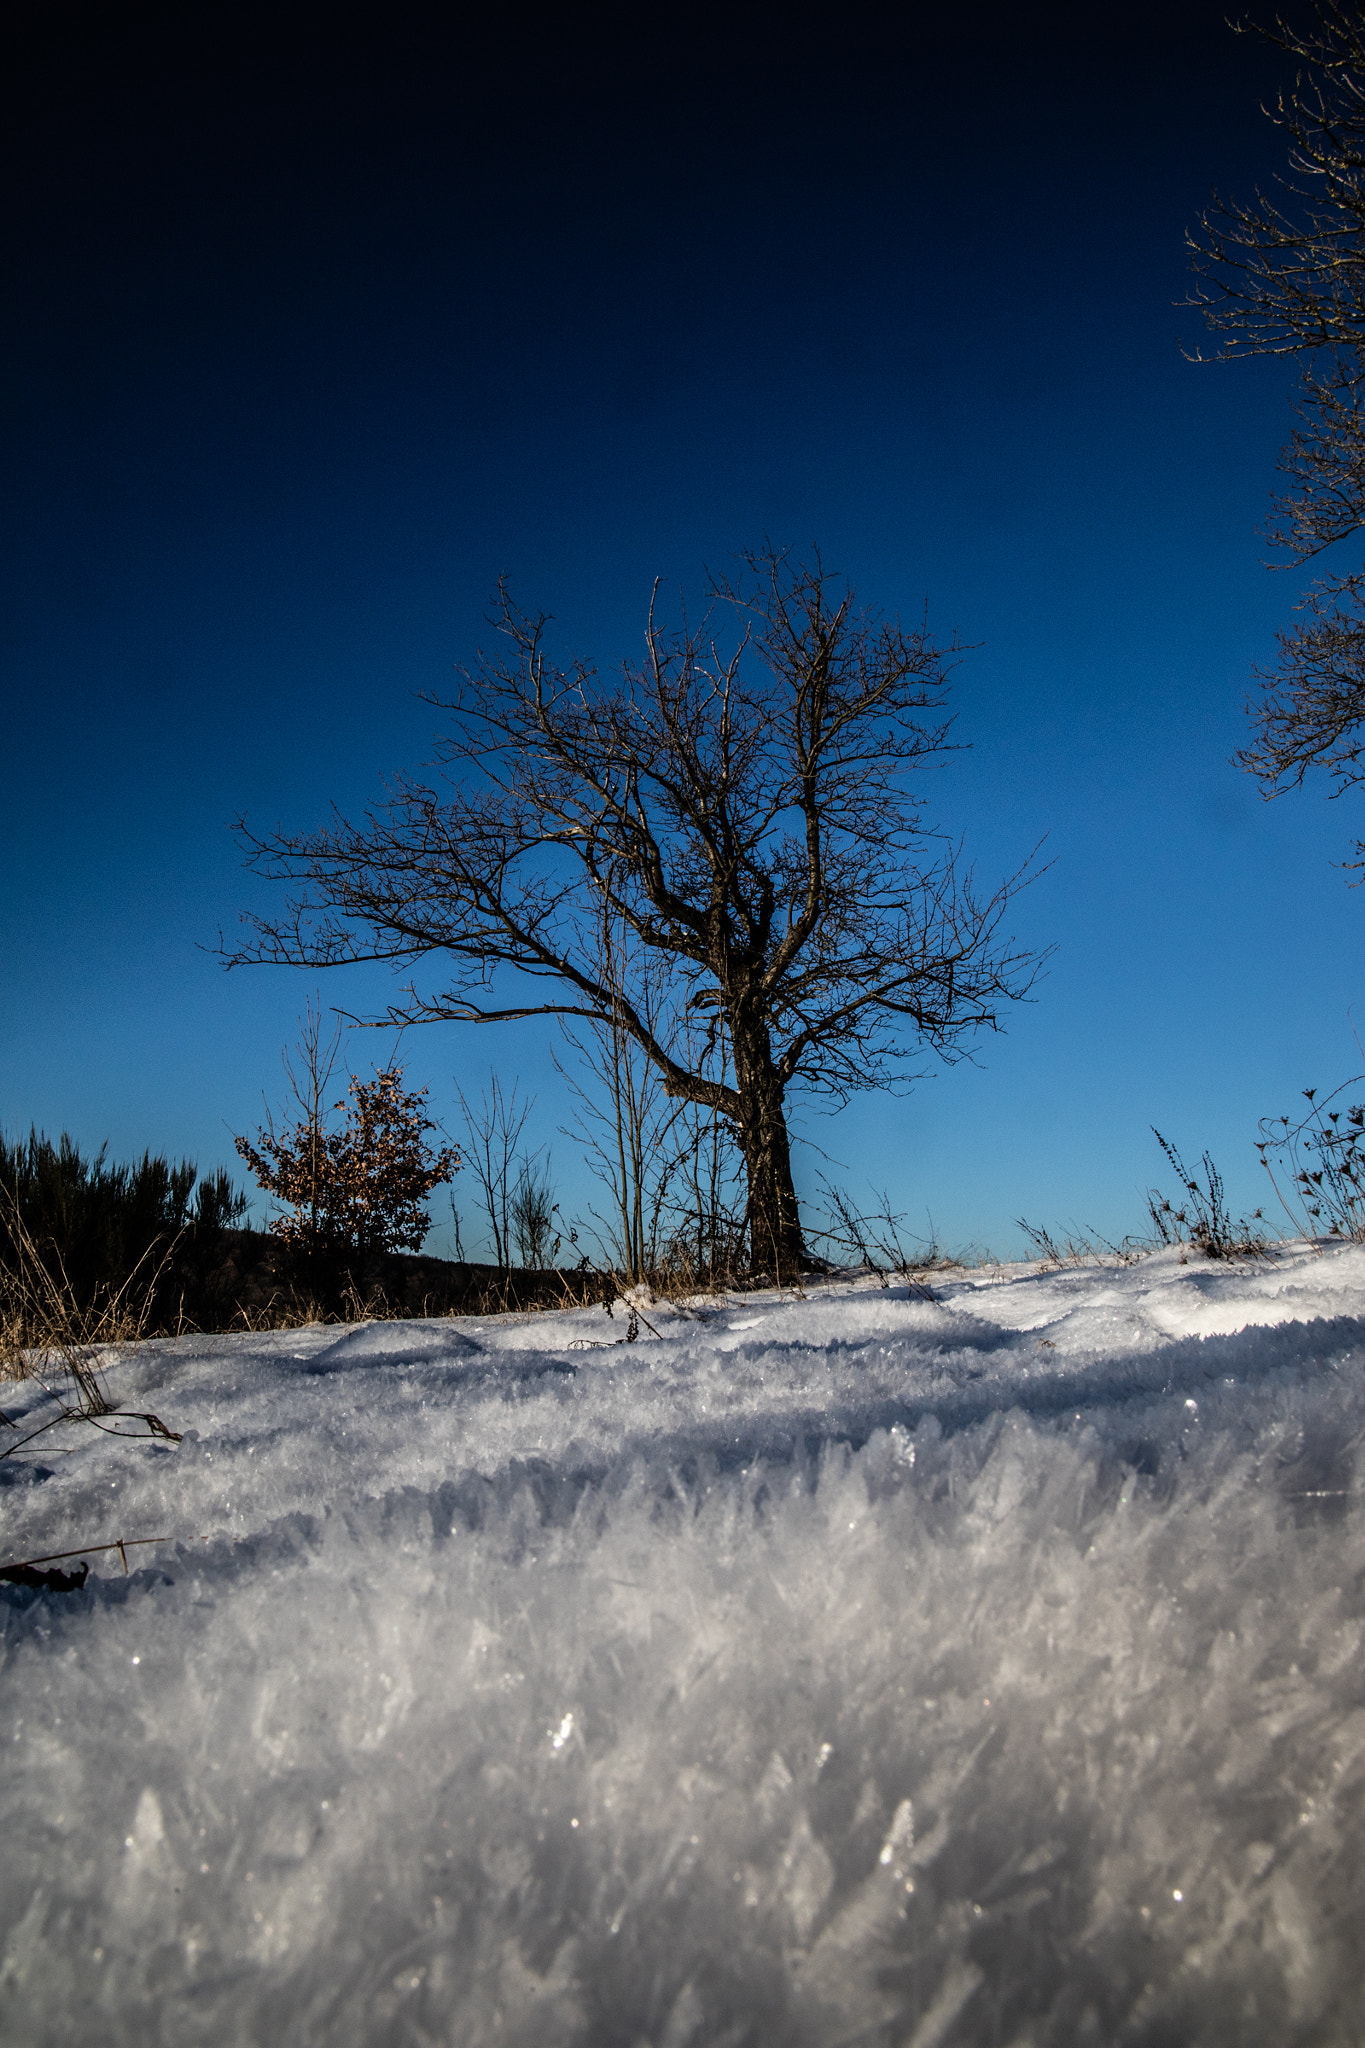 Canon EOS 5D Mark IV + Sigma 24-105mm f/4 DG OS HSM | A sample photo. Ice, frost and tree.  photography